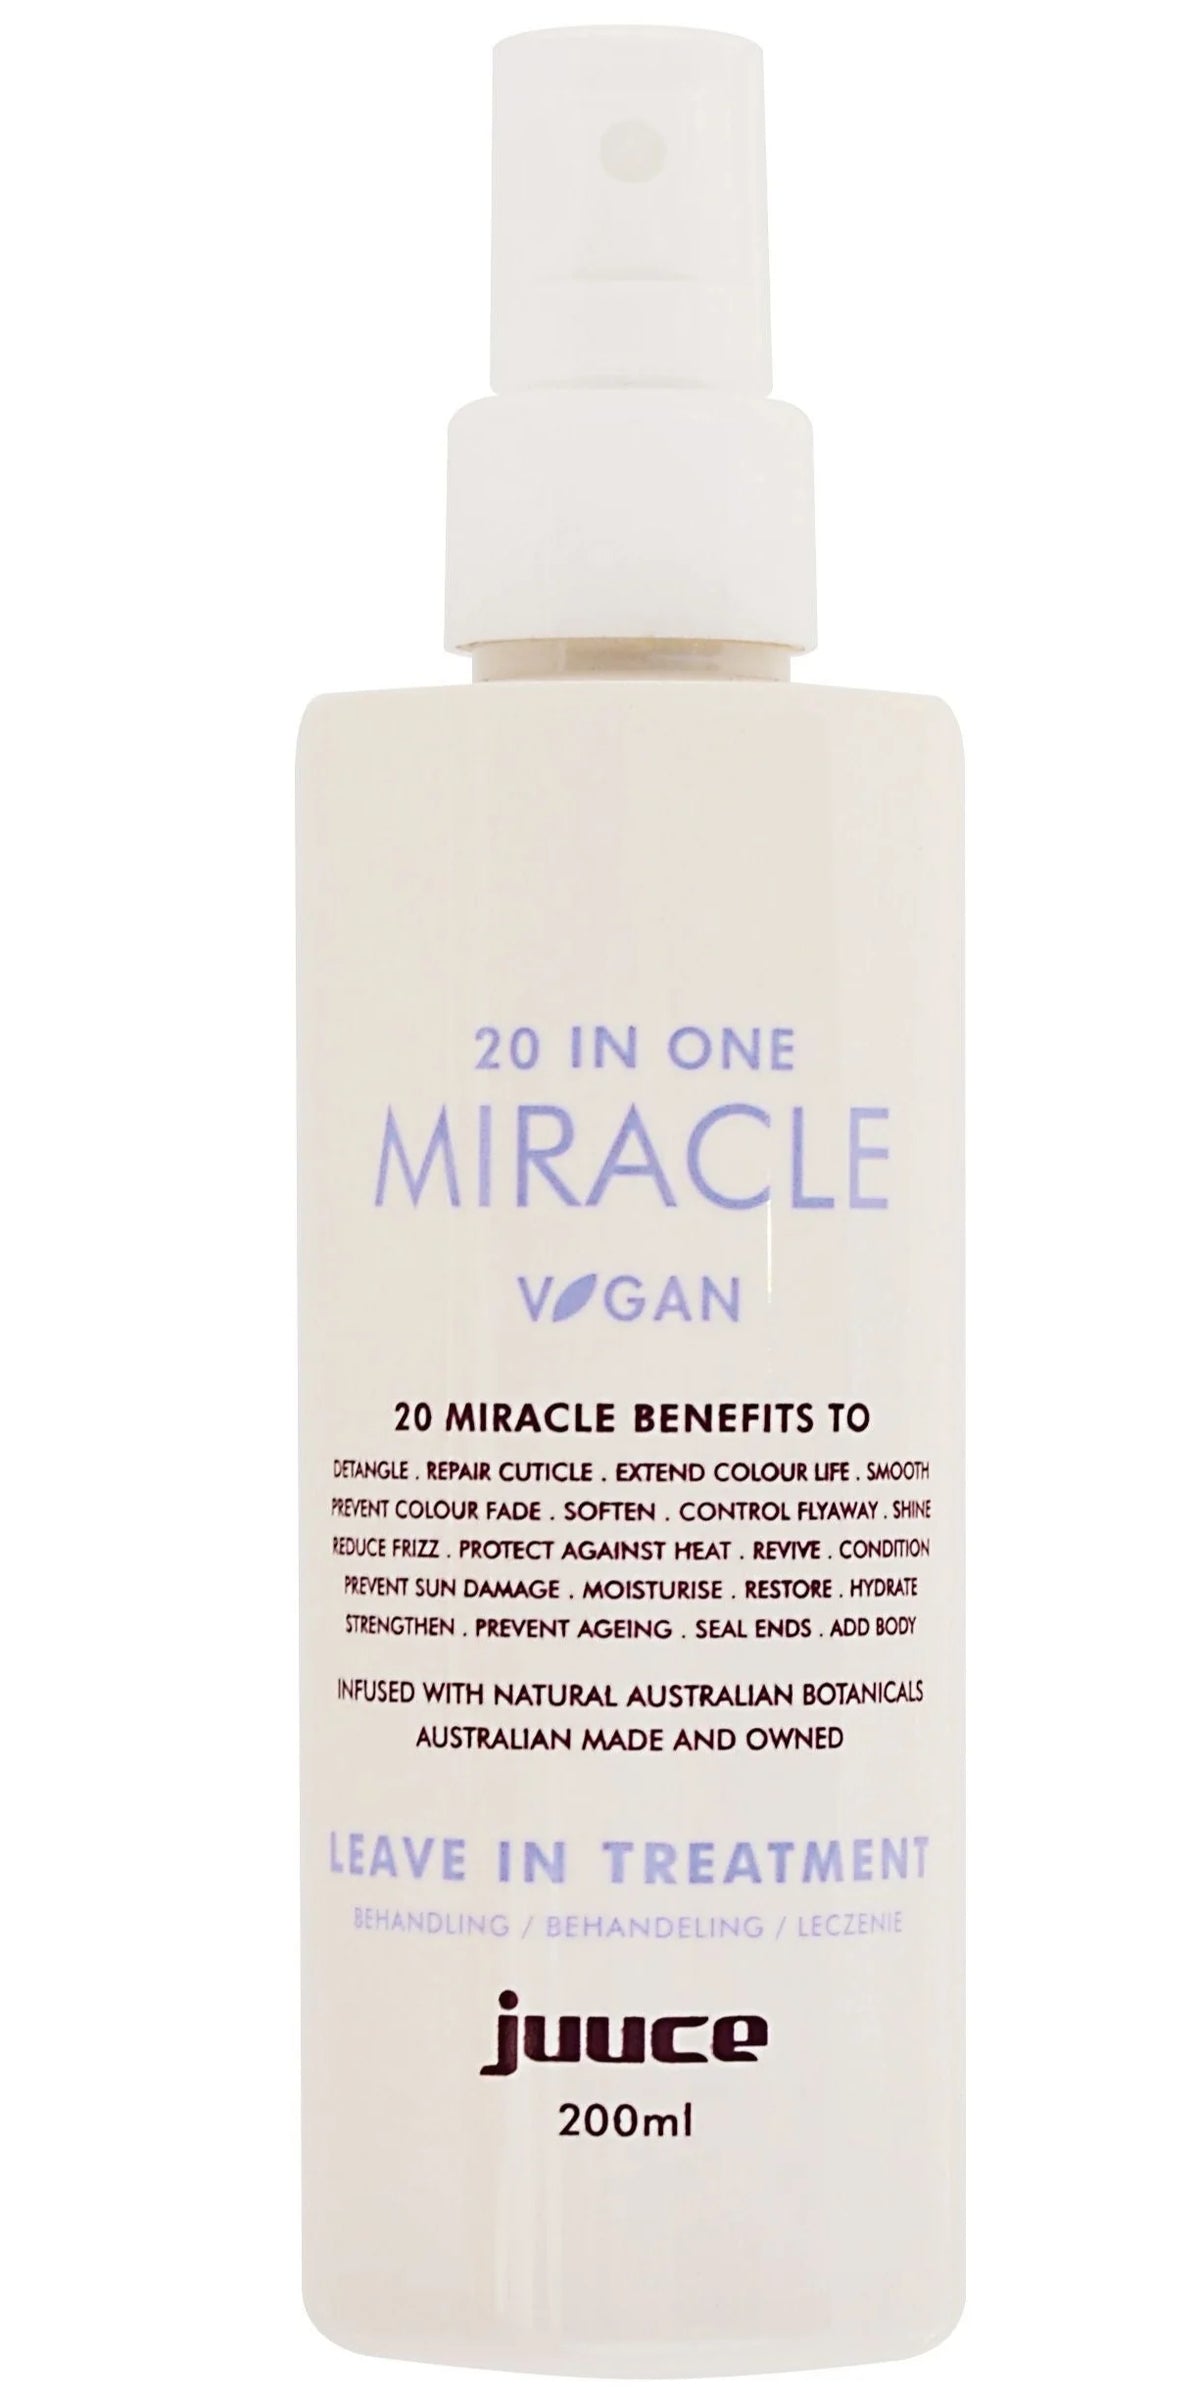 Juuce 20 in One MIRACLE Spray all in one Treatment 200ml